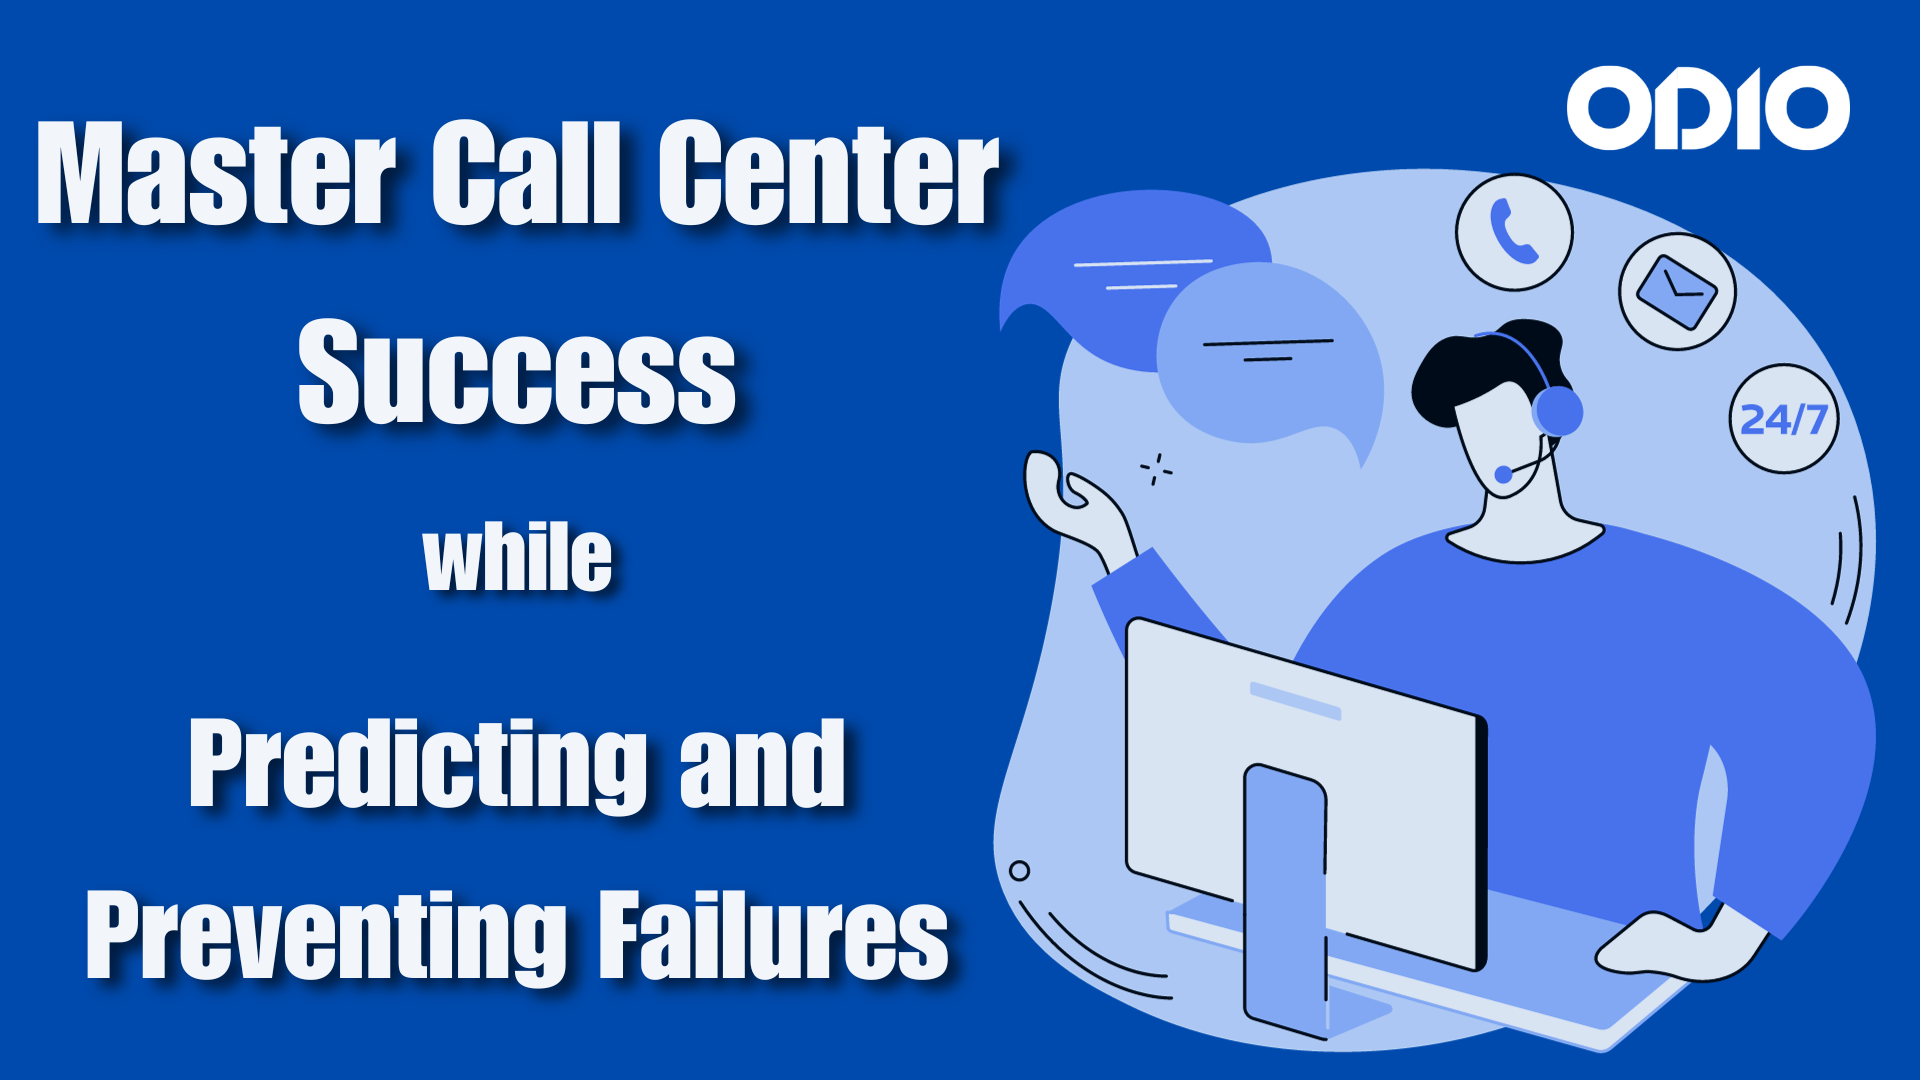 Shows the text along with a graphic template to reference the title i.e. Master Call Center Success while Predicting and Preventing Failures